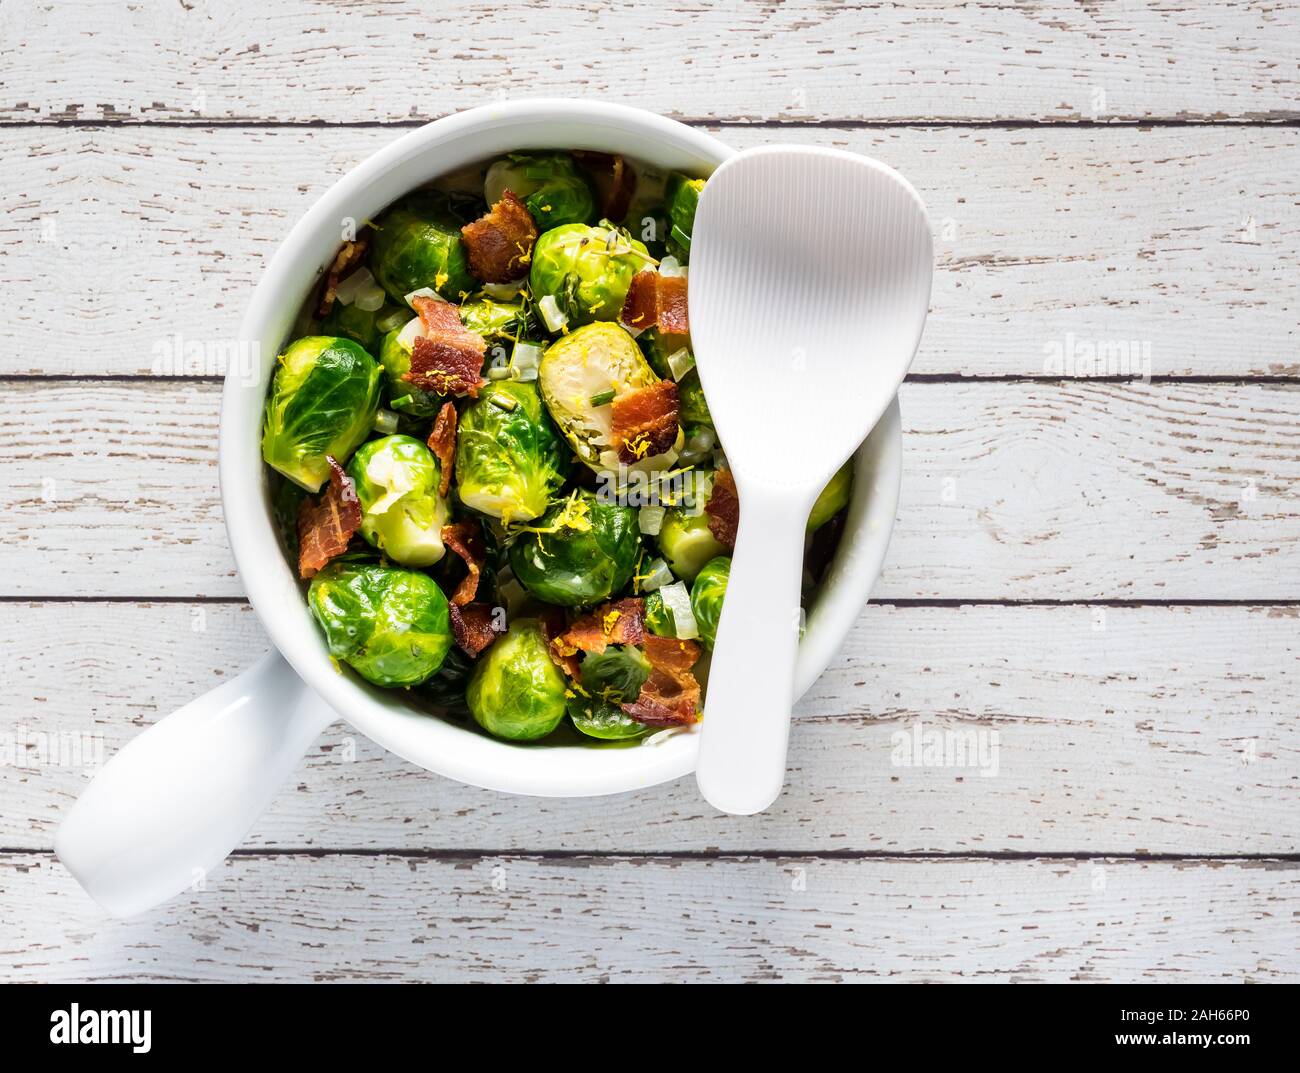 casserole dish of brussel sprouts. Stock Photo